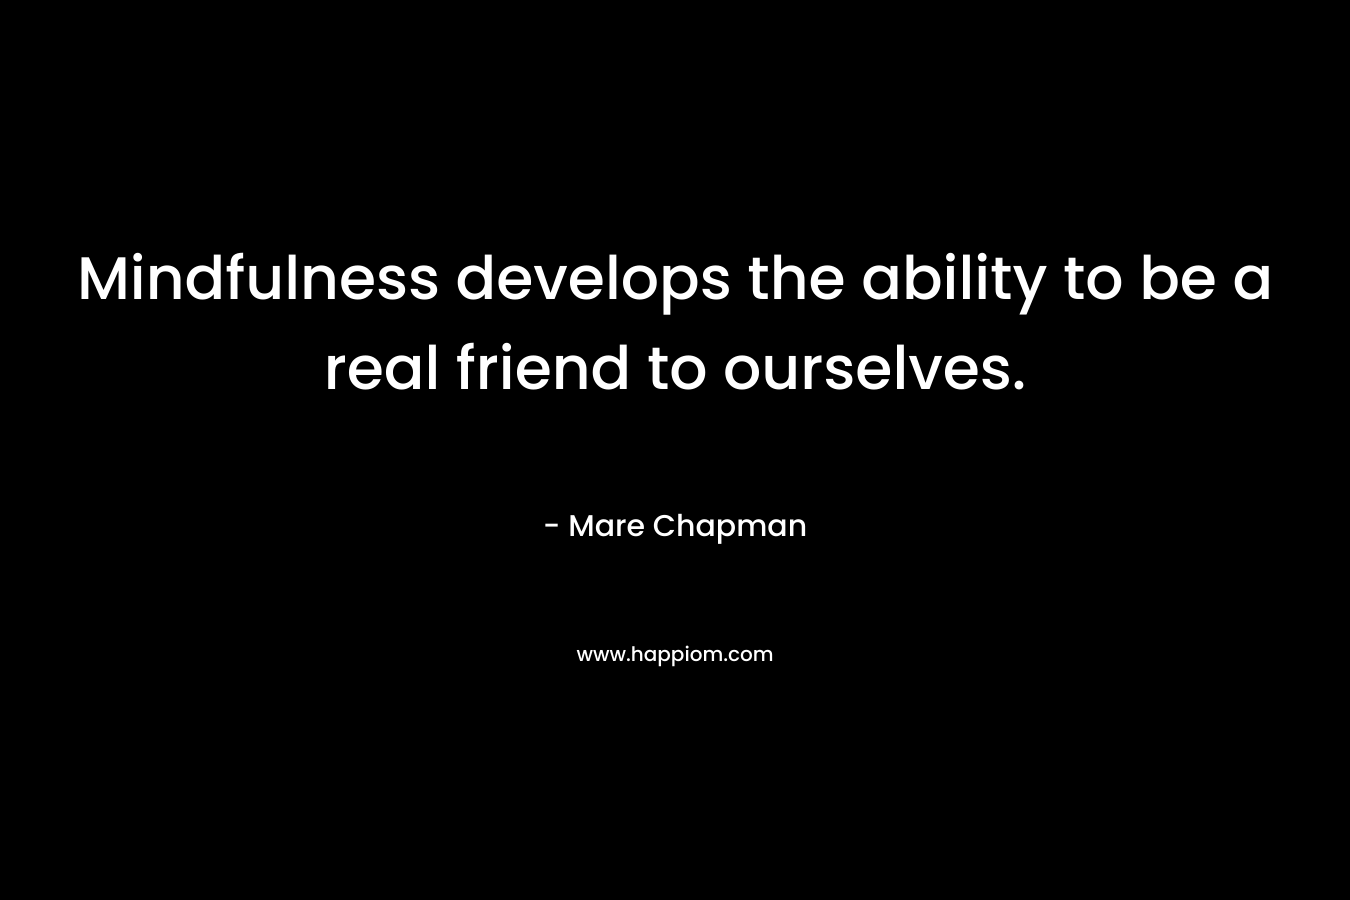 Mindfulness develops the ability to be a real friend to ourselves.